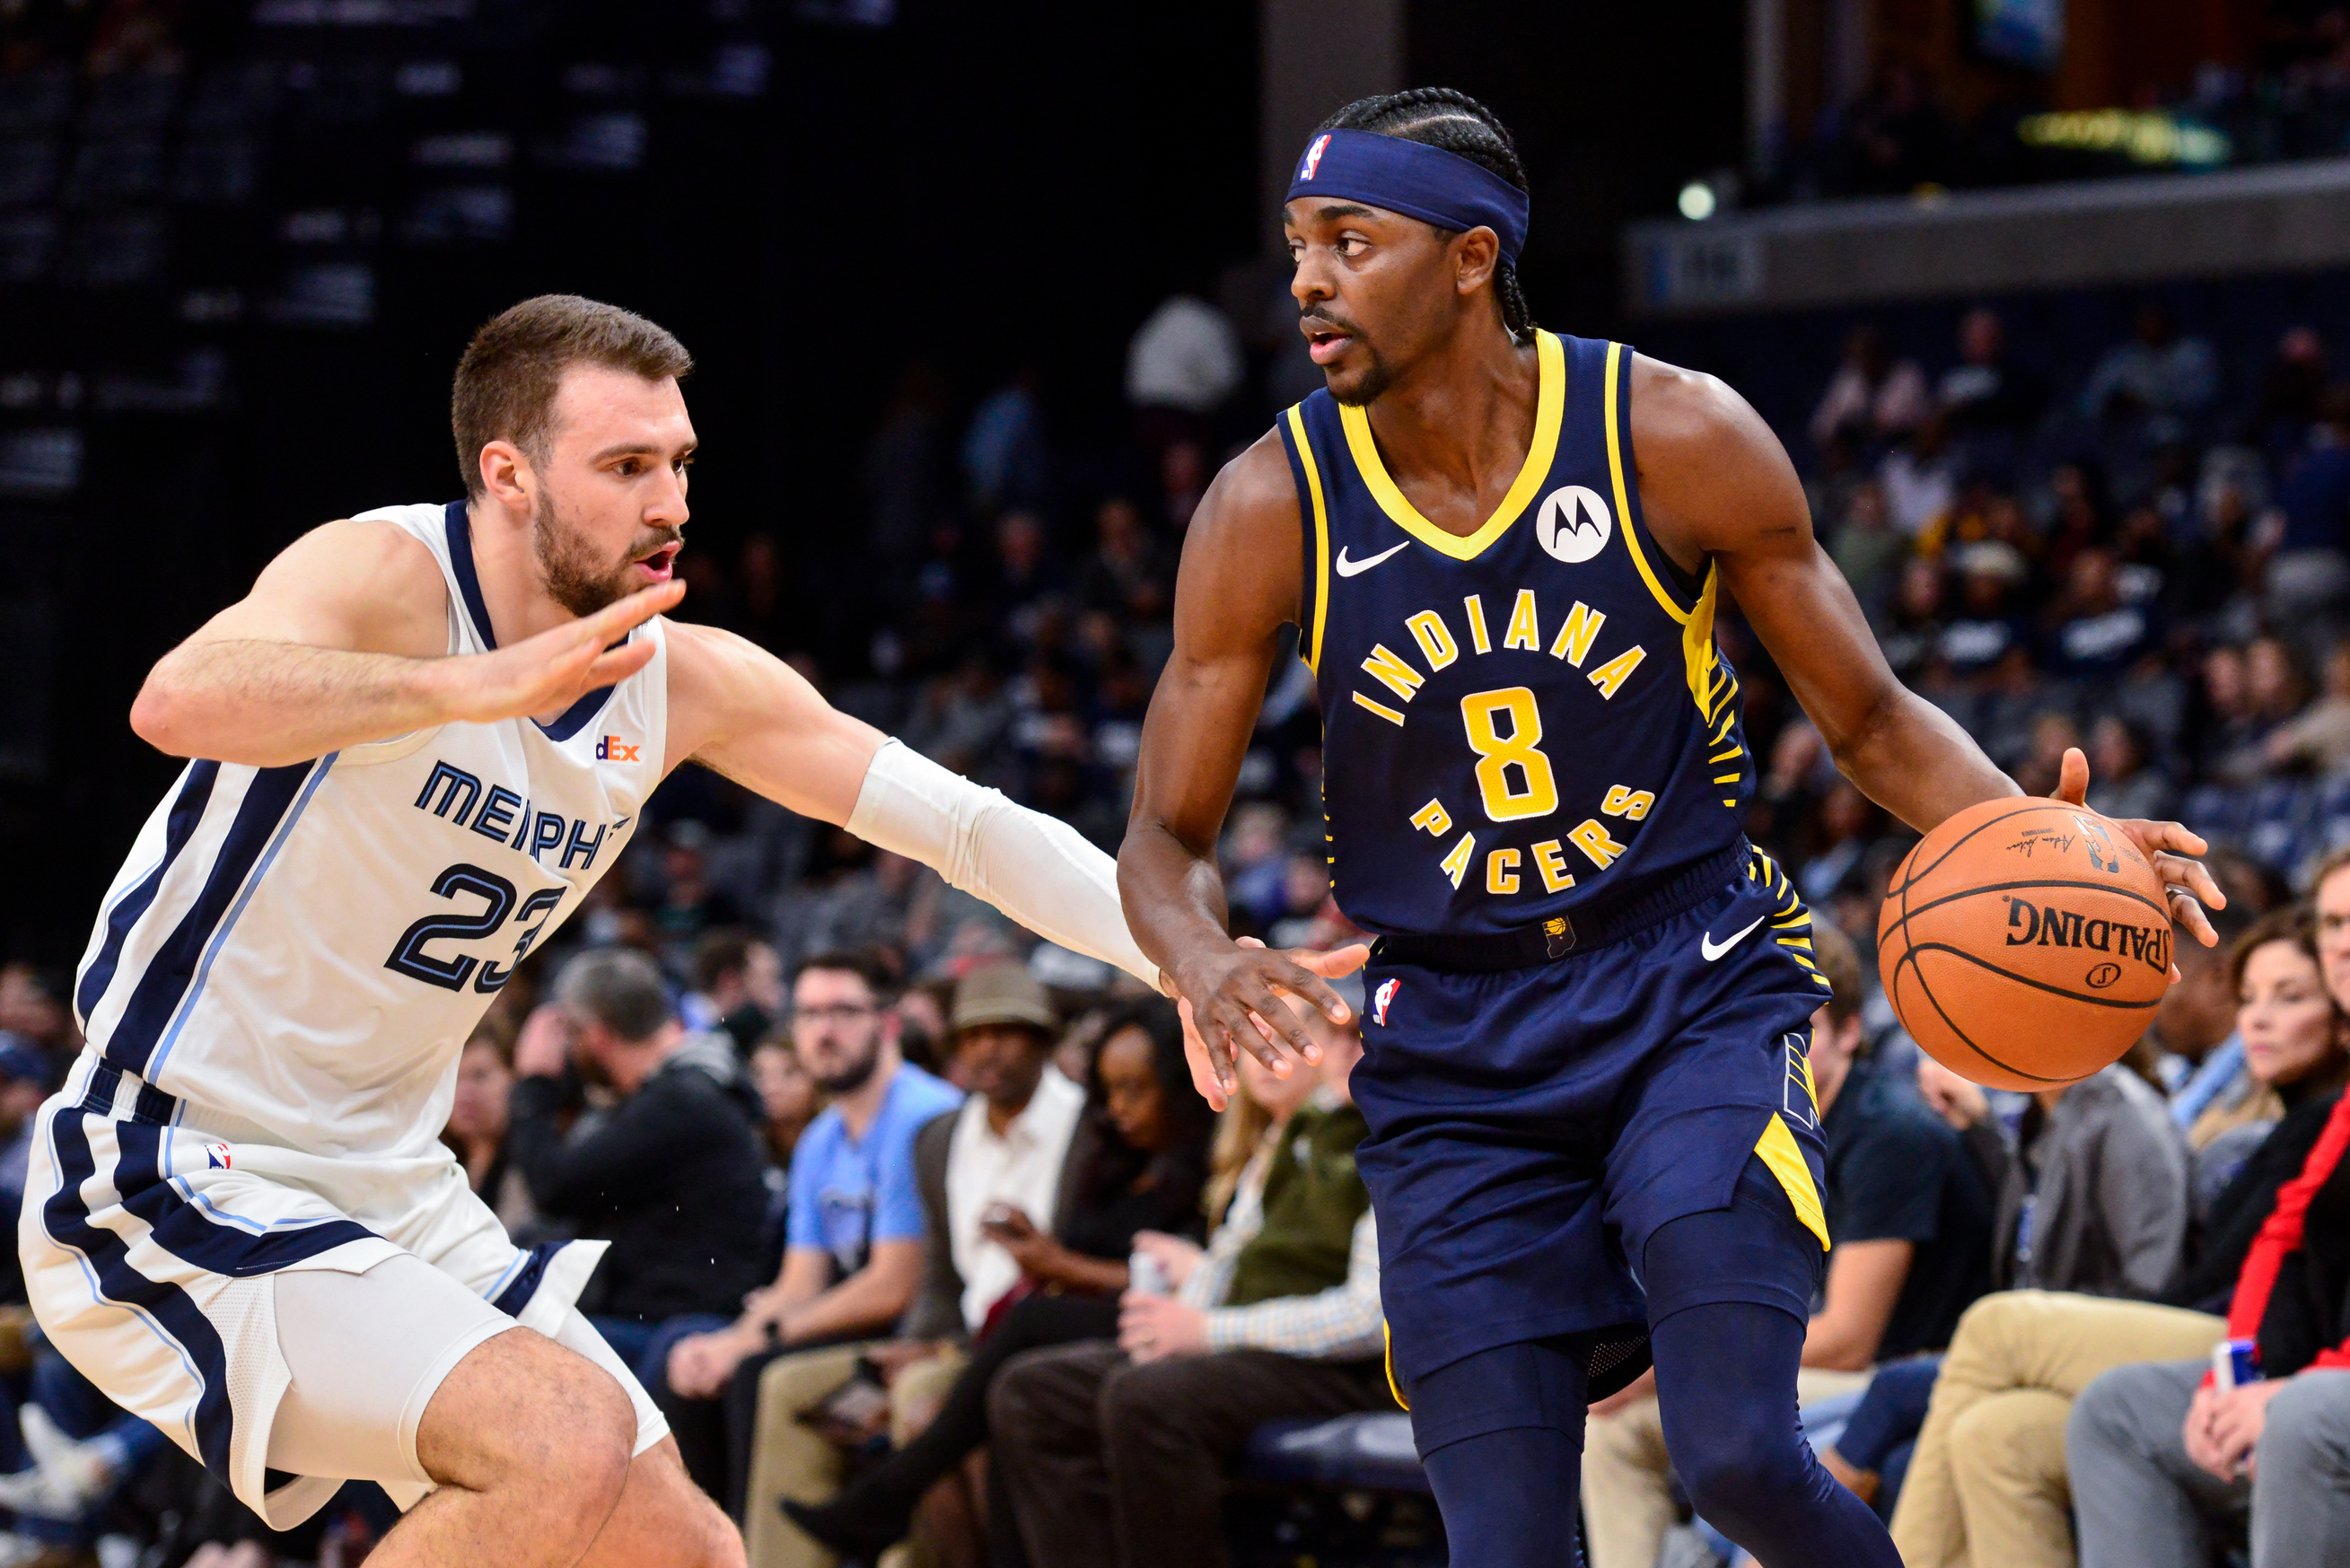 Balanced scoring carries Pacers past short-handed Grizzlies